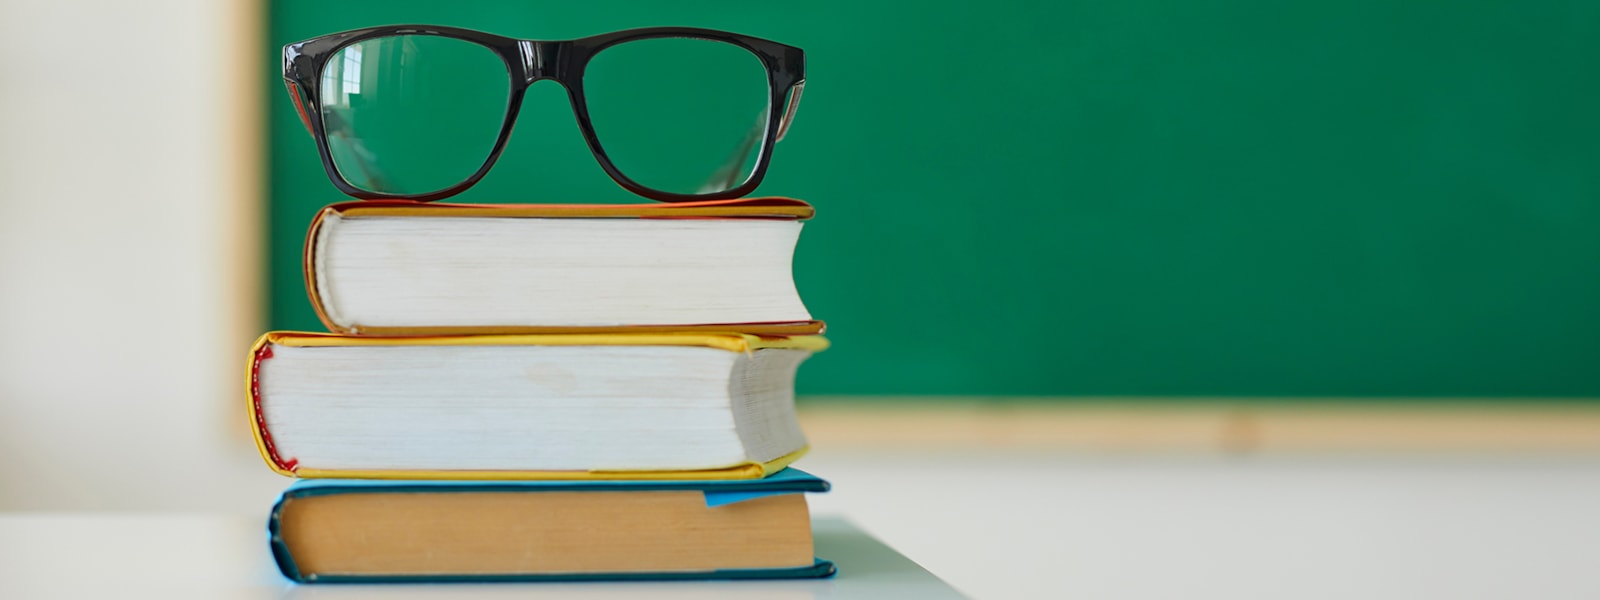 pair of glasses on books